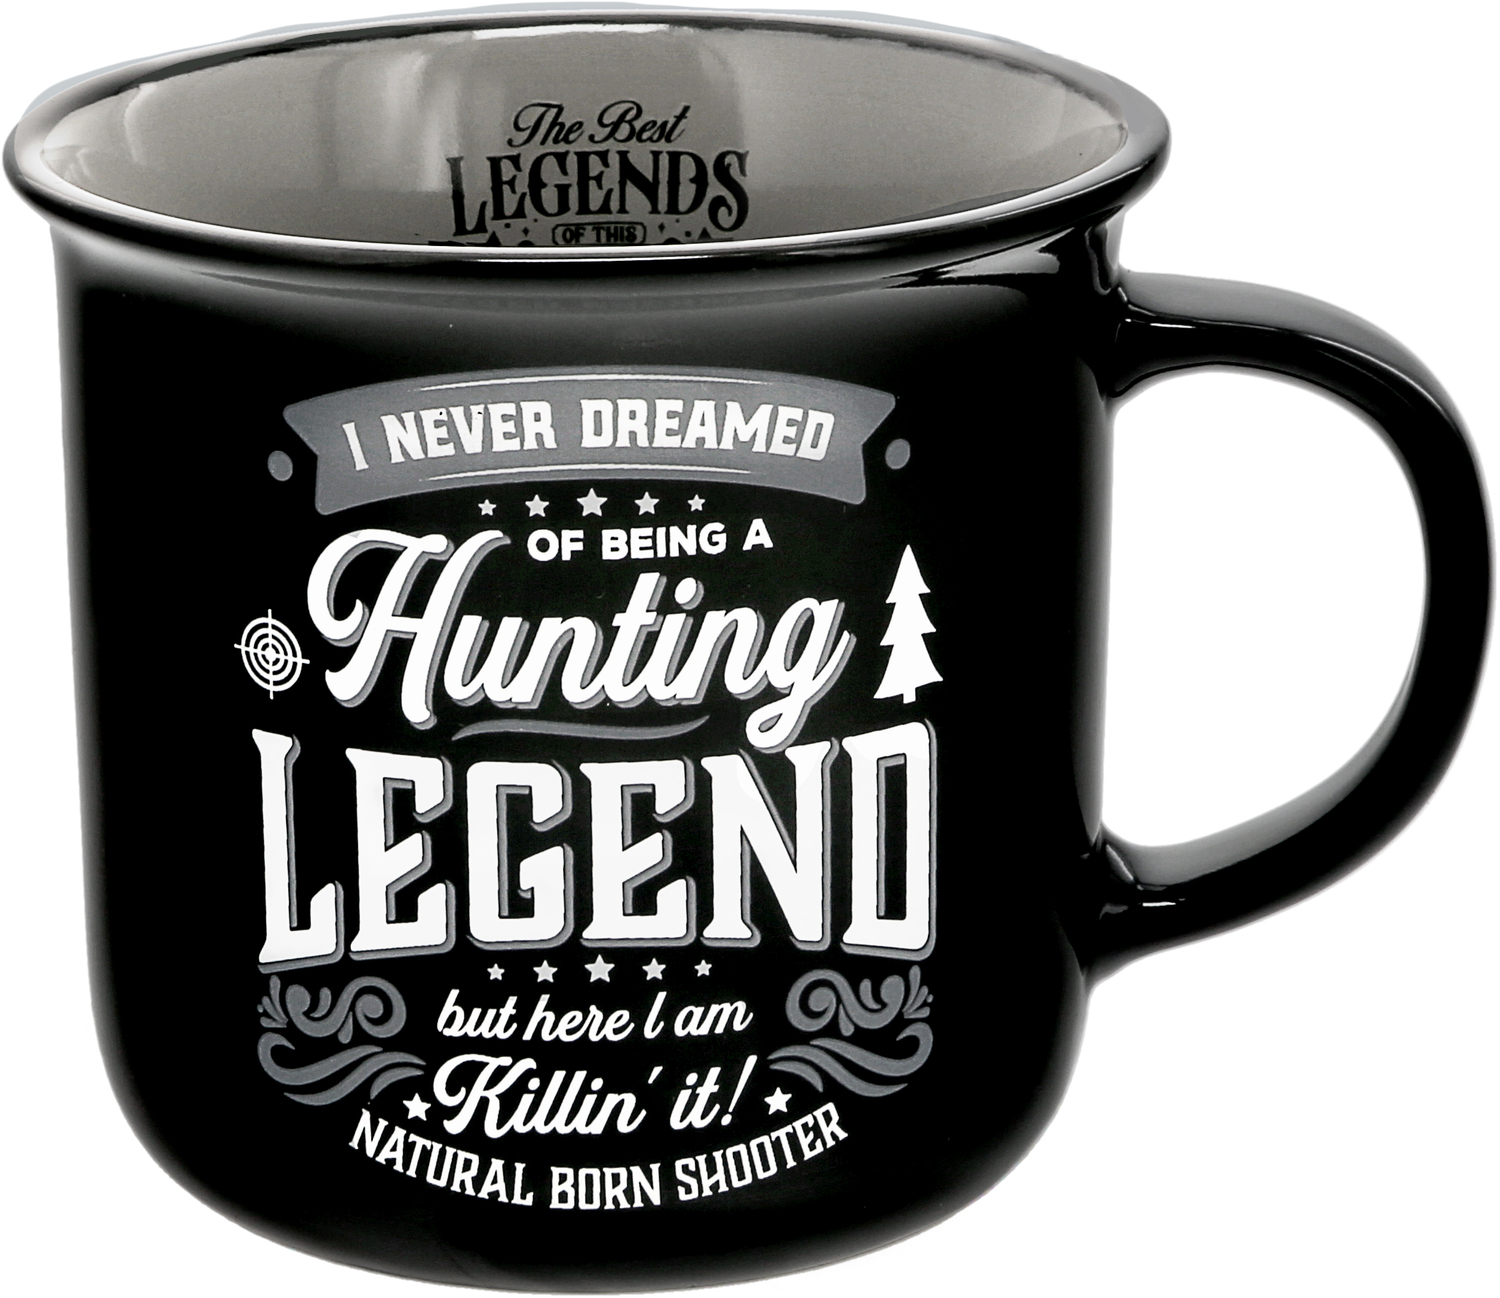 Hunting by Legends of this World - Hunting - 13 oz Mug